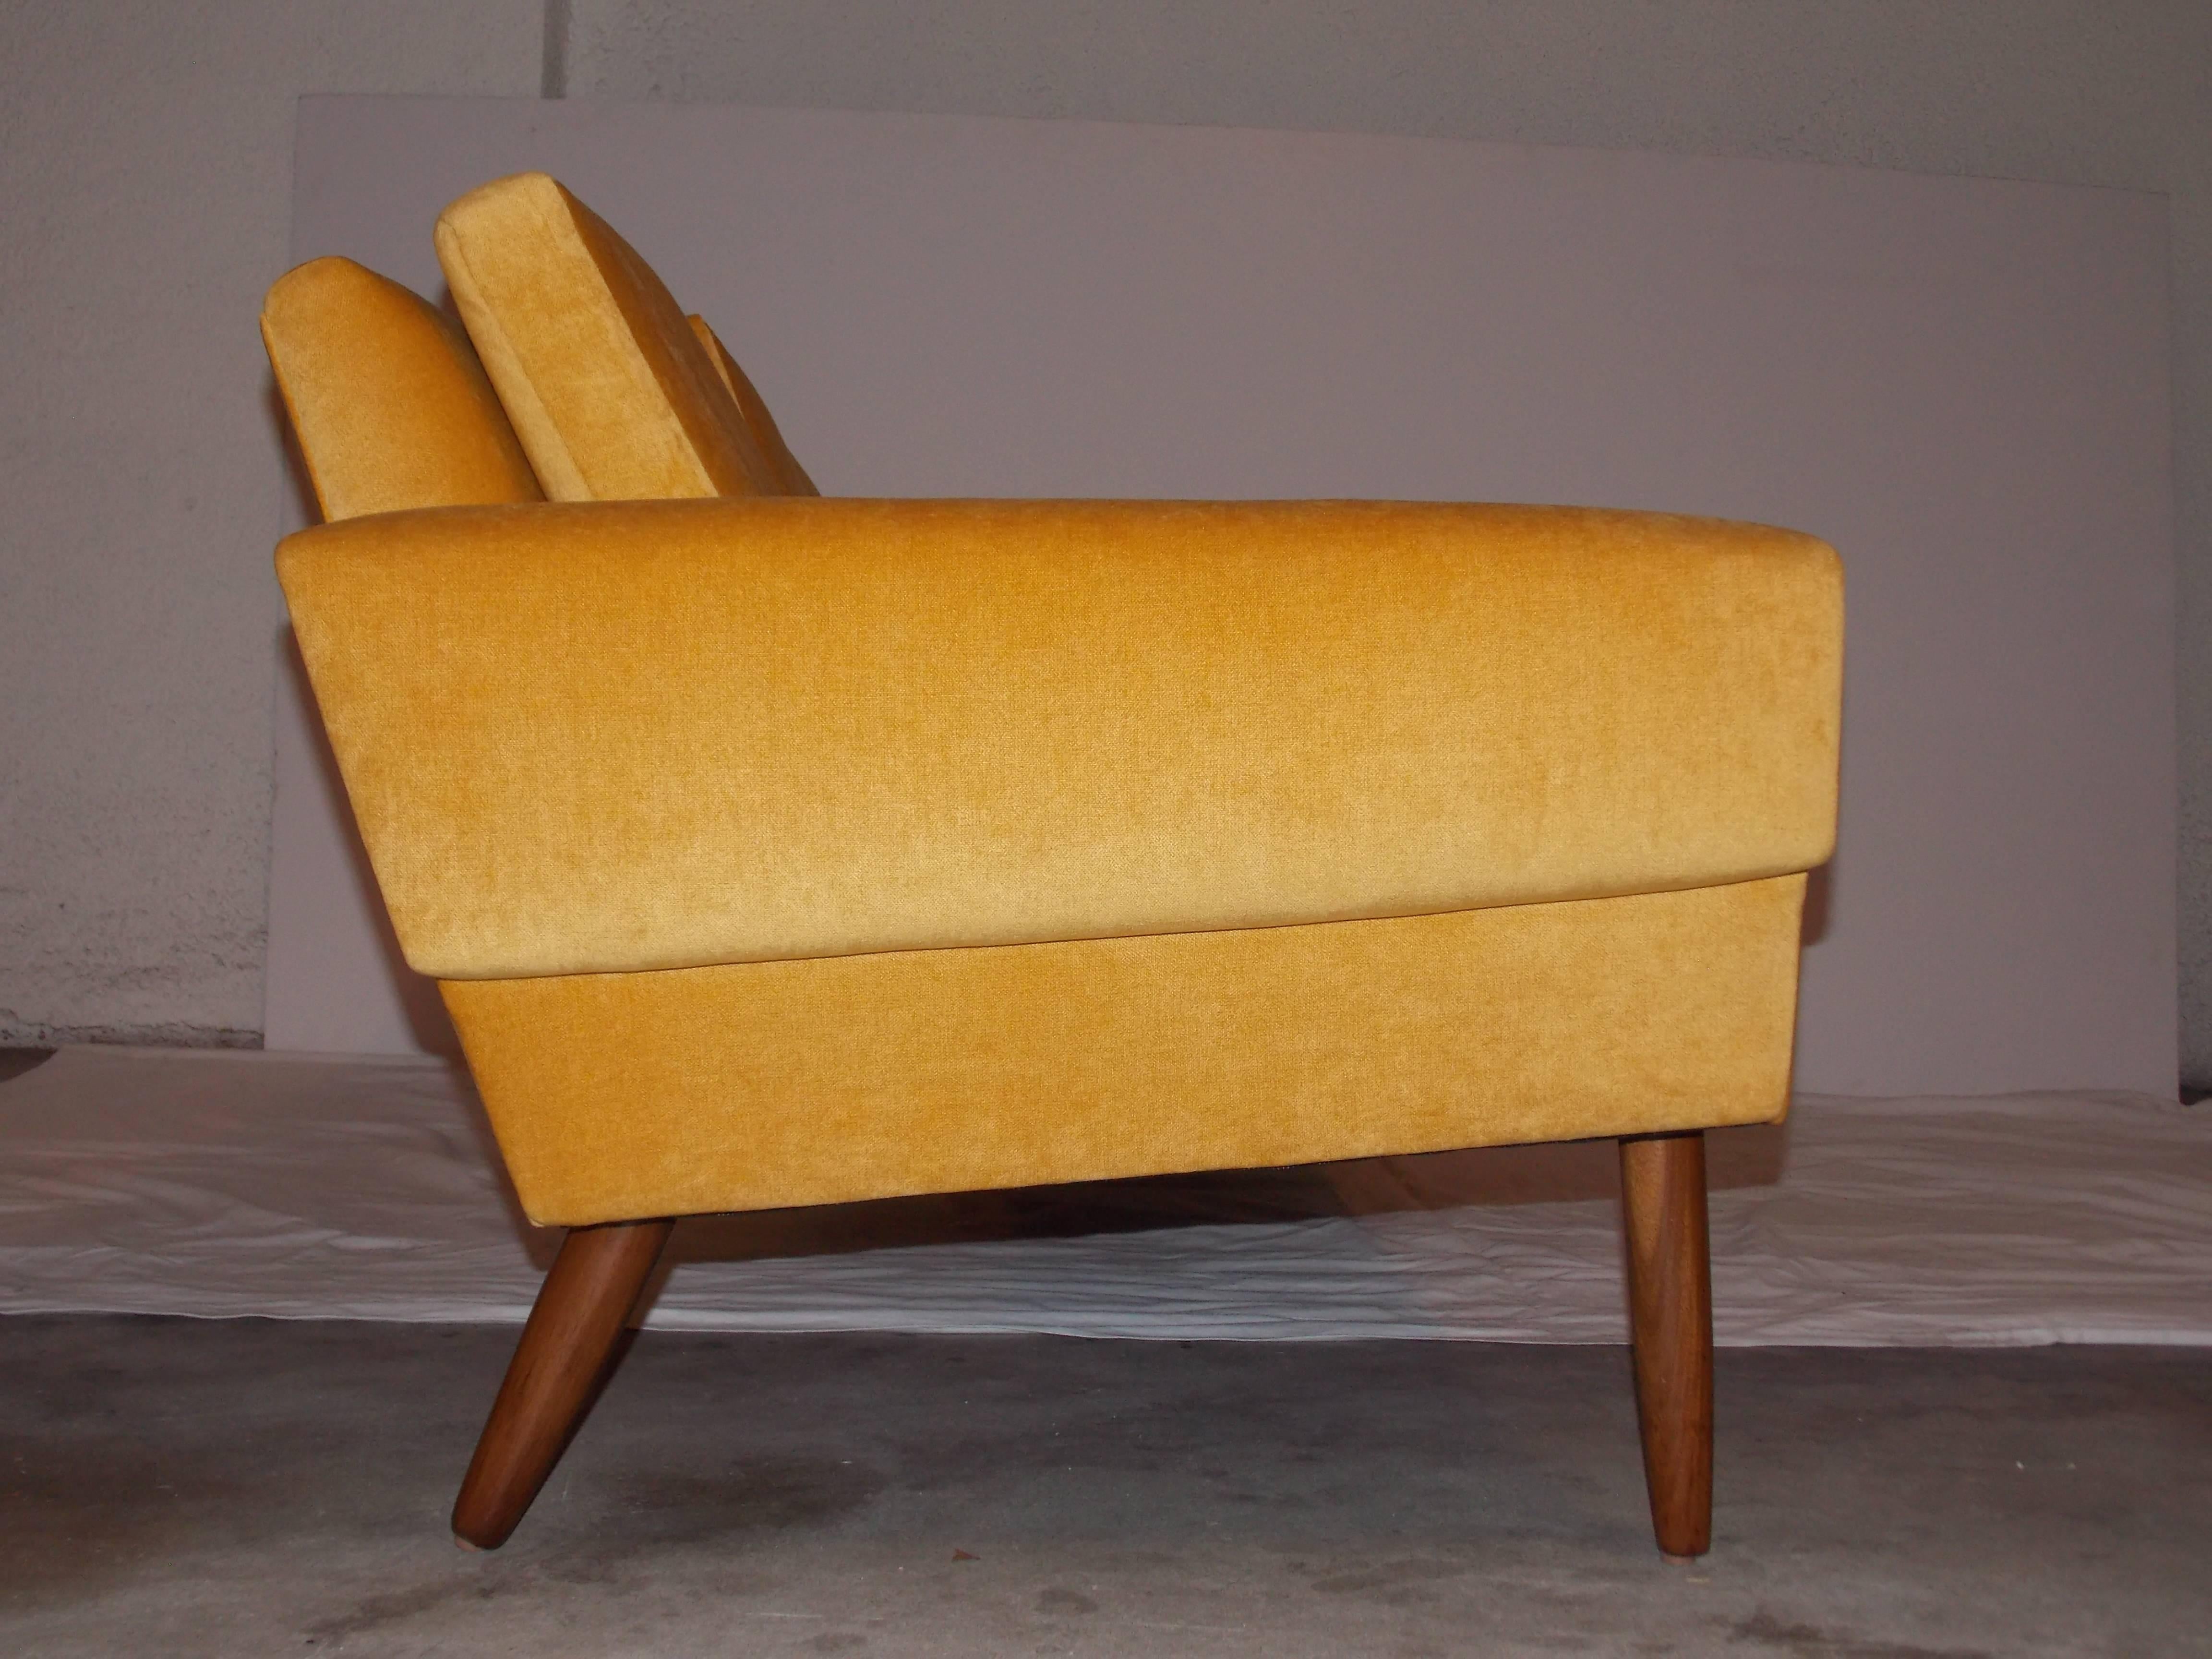 A handsome modernist design.
Reupholstered with a beautiful marigold velvet fabric.
In great condition.
Sturdy and stout.
Great for a studio, office or apartment.